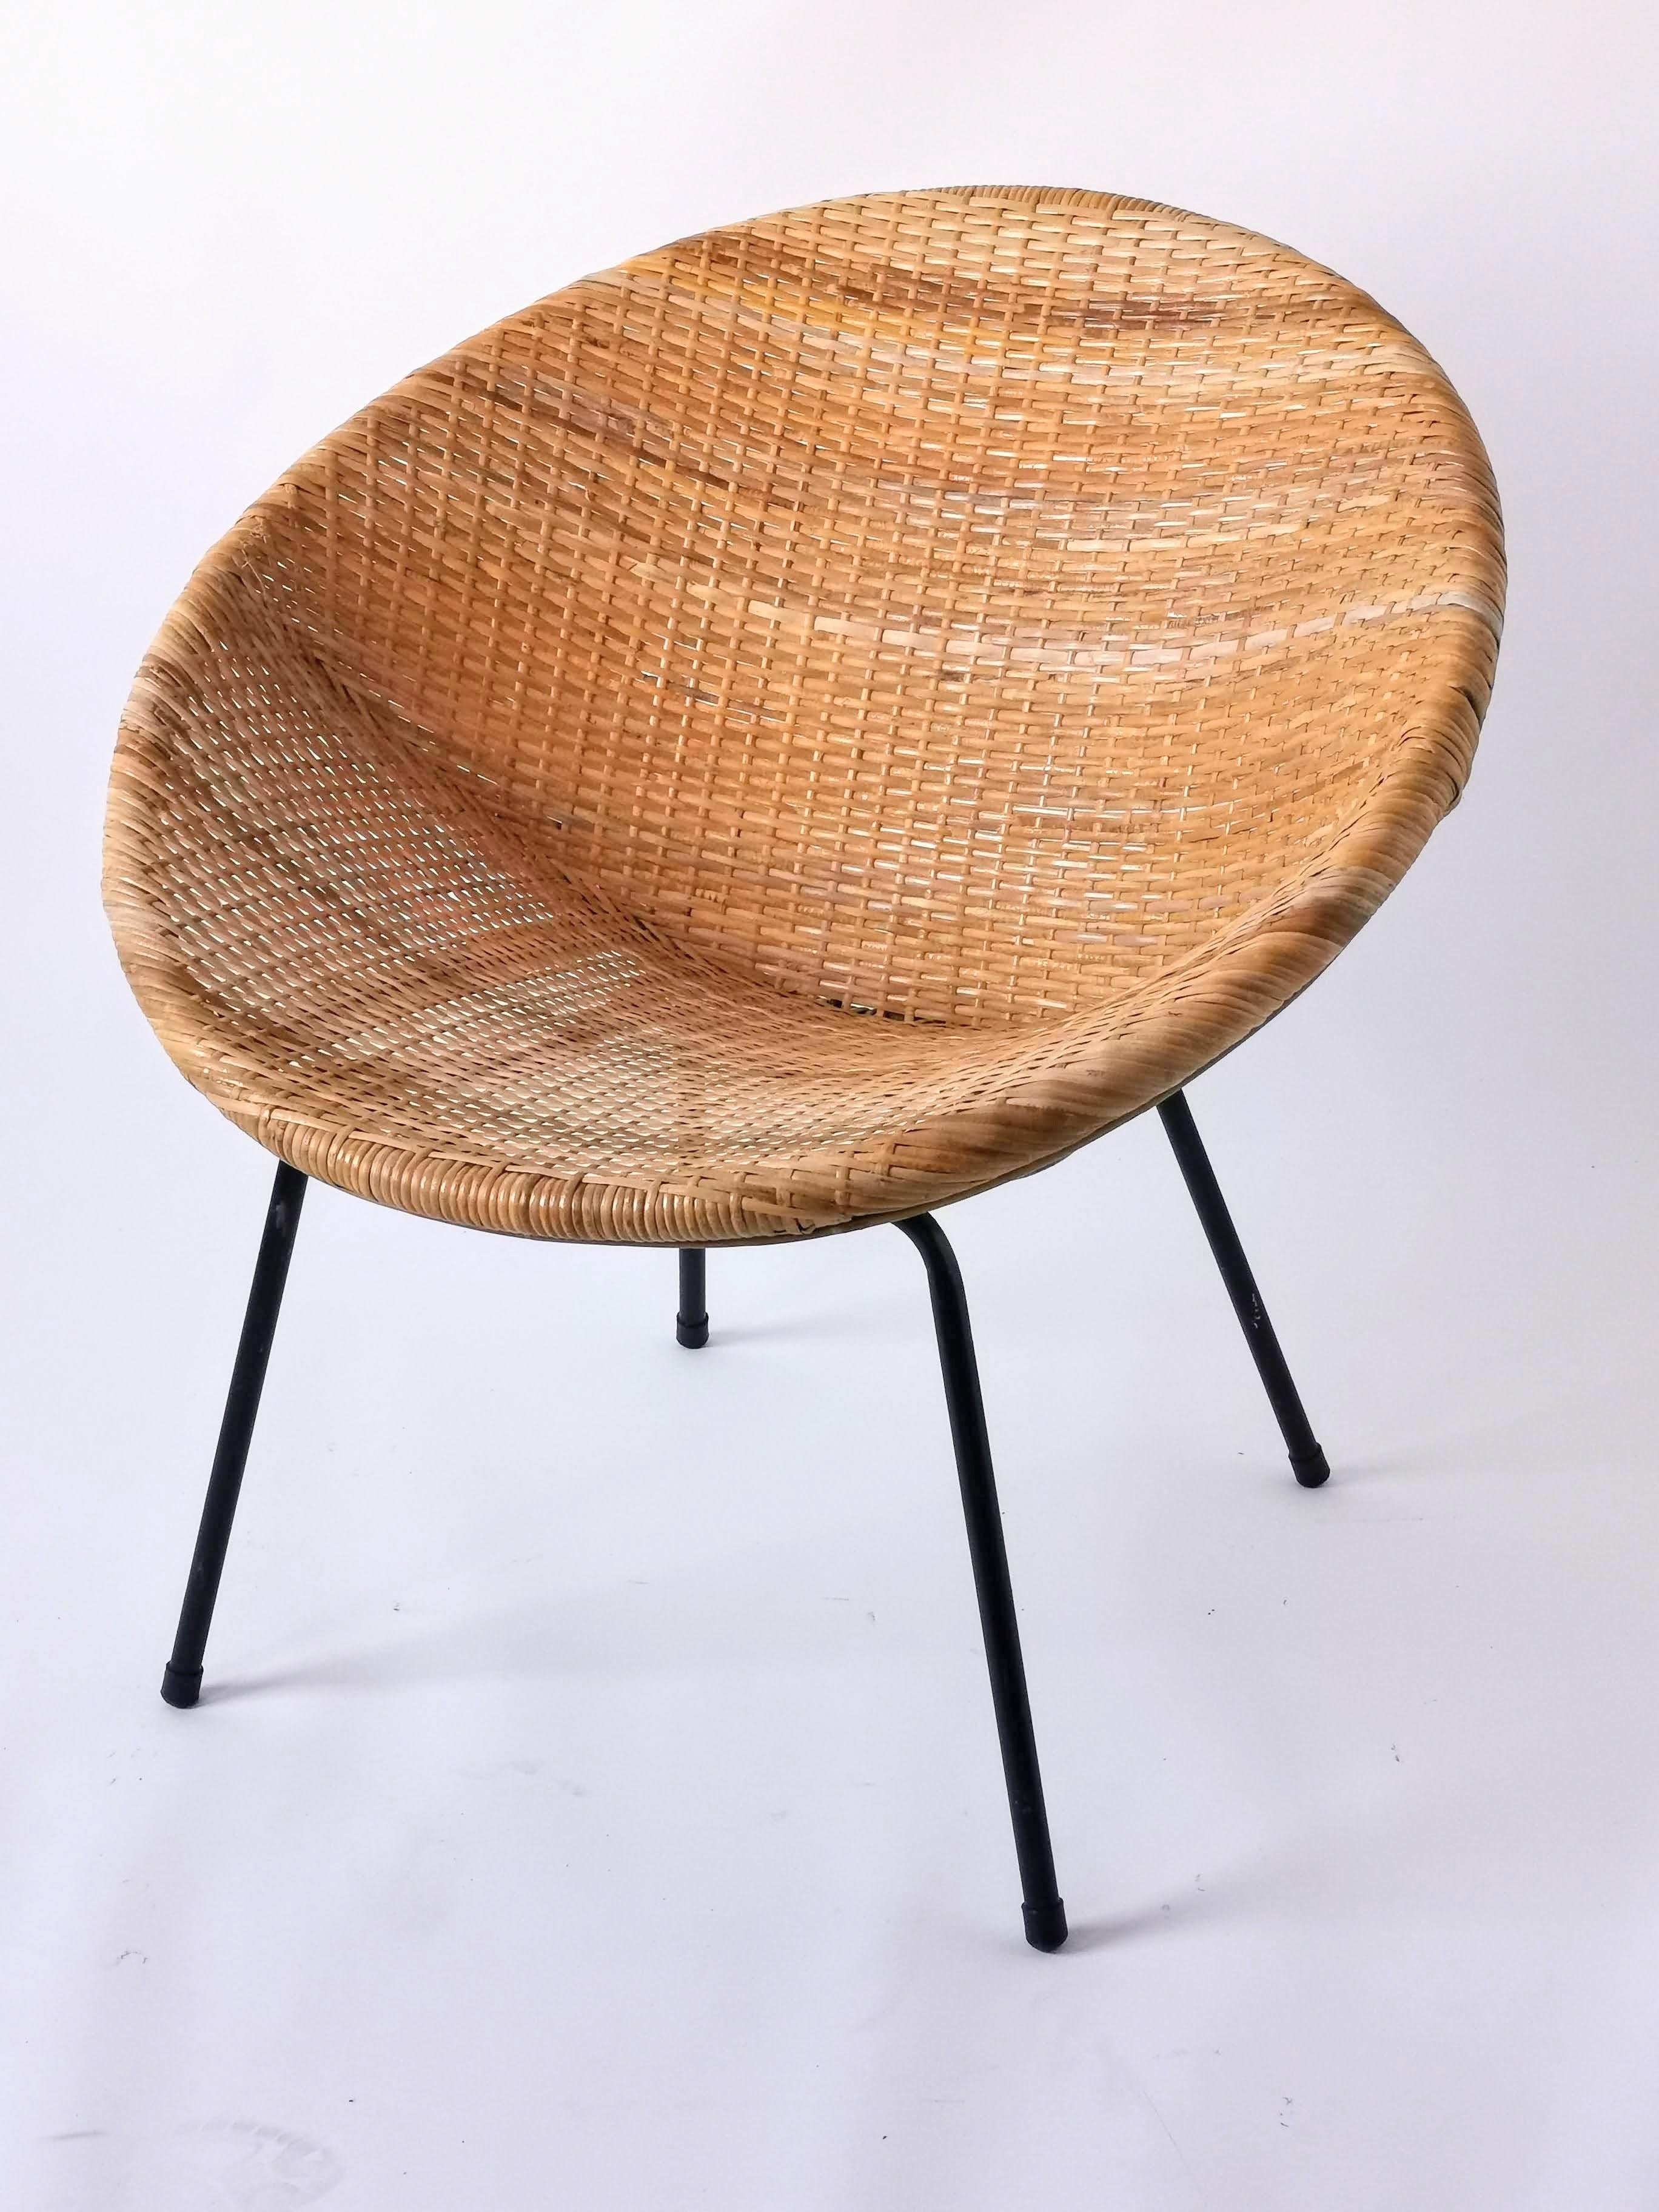 In very good condition with wicker still supple with a light flex when sitting.

Comfortable ergonomic seating. 

Solid well made construction. 

 

   